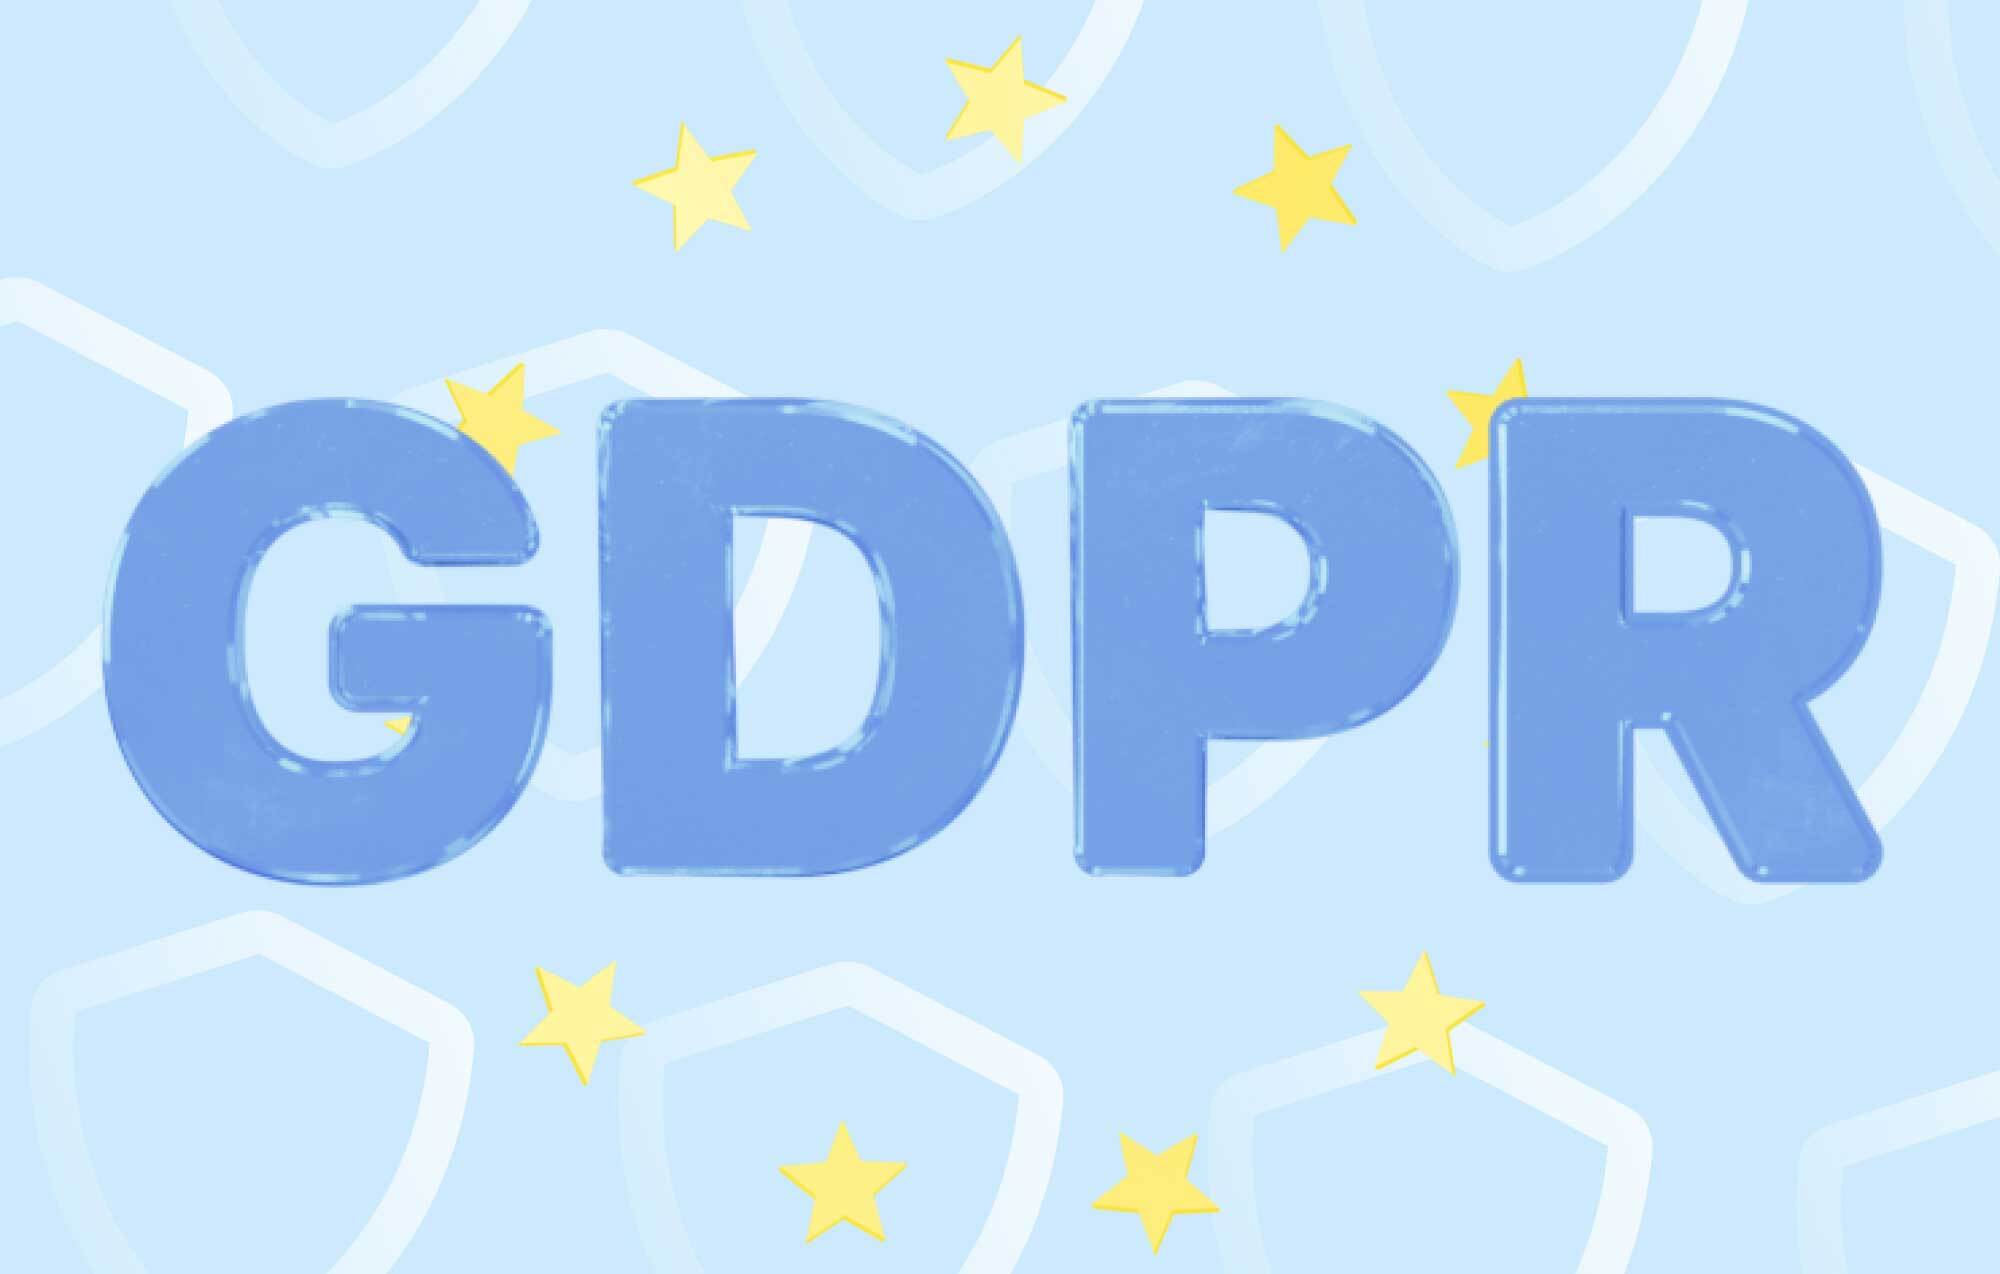 GDPR sign with EU stars on background of blue shields for charles blog post about WhatsApp opt-ins